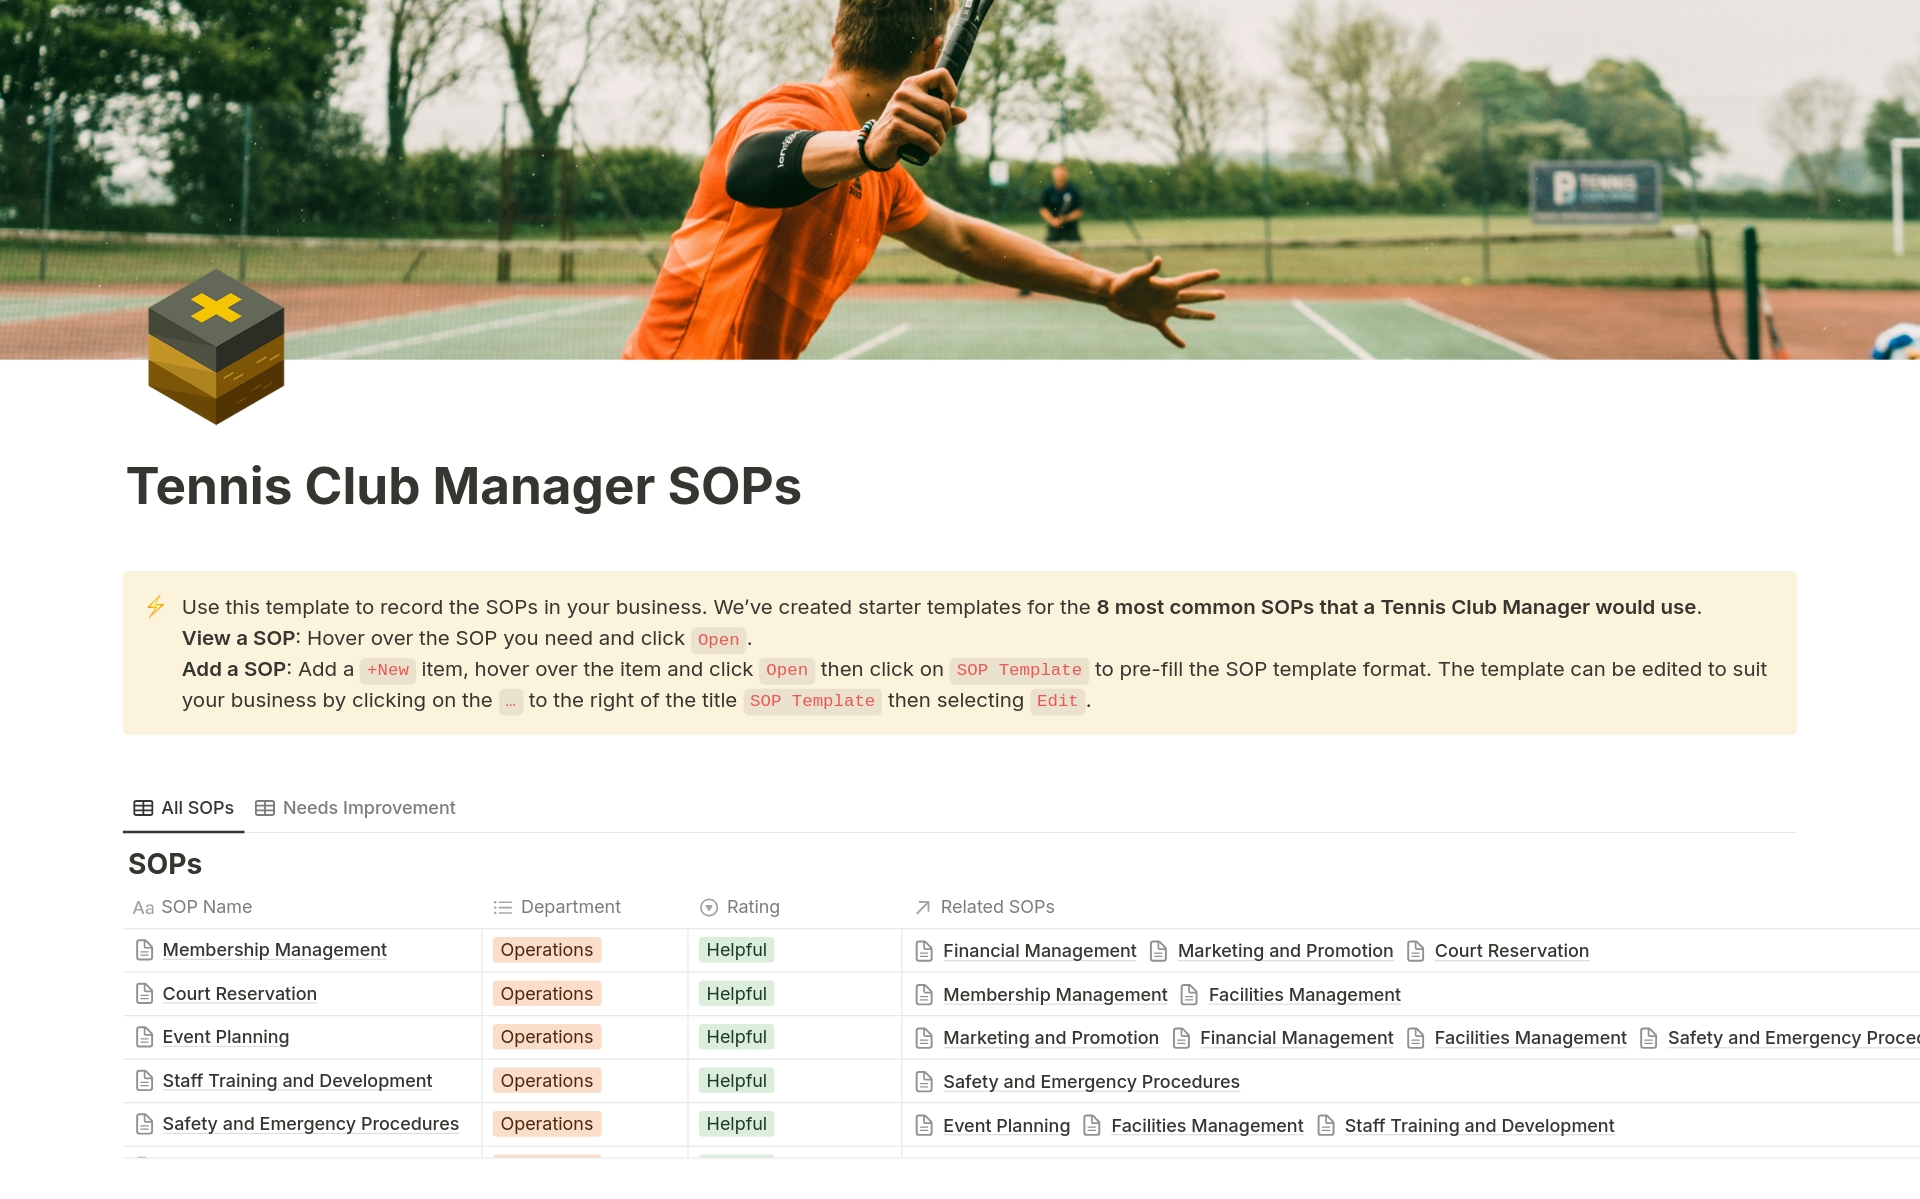 This template outlines Standard Operating Procedures (SOPs) for managing a tennis club. It covers Membership Management, Court Reservations, Event Planning, Staff Training and Development and more. Save 10 hours of research.